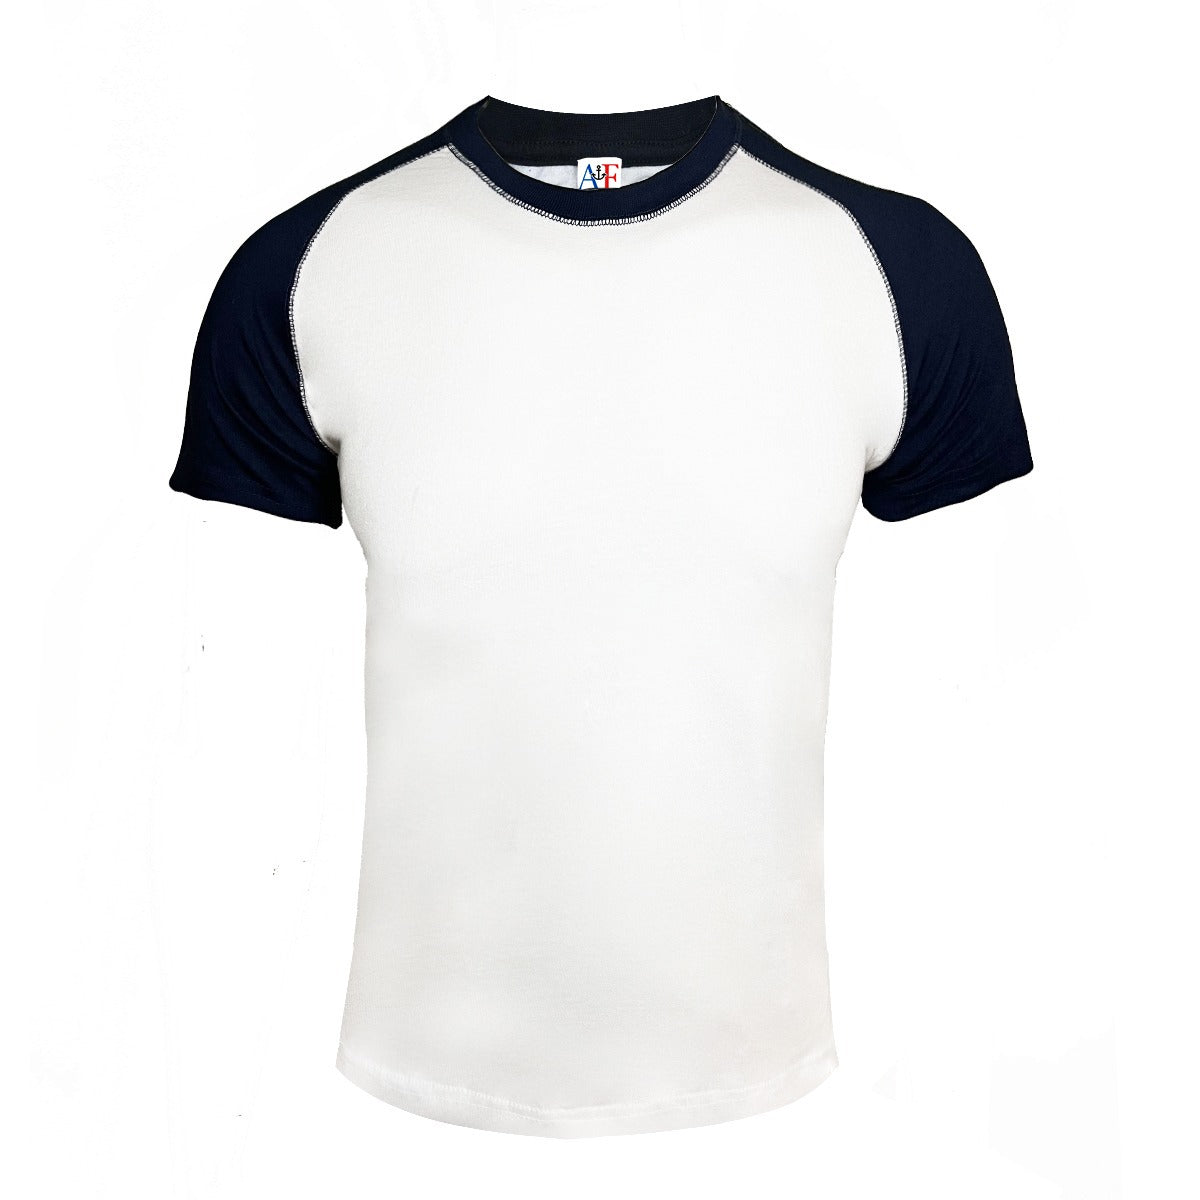 1101 - Youth Baseball Tee - Navy/White Color - AF APPARELS(USA)